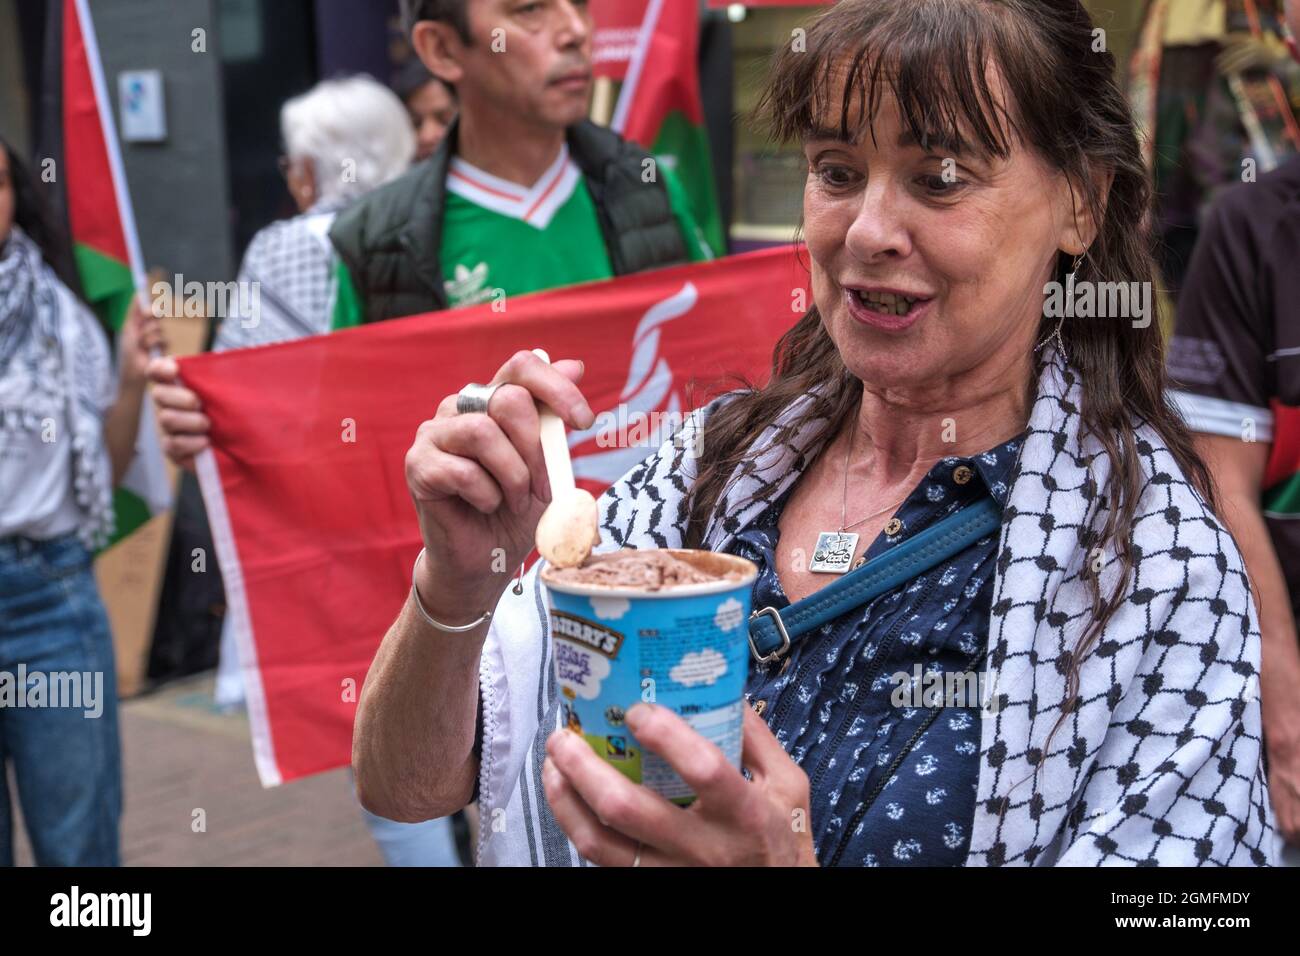 London, UK. 18 Sept 2021. A woman outside the London Puma store in Carnaby Street celebrates the decision by Ben & Jerry to boycott Israel by eating their ice cream in the protest on the #BoycottPUMA Global Day of Action. They call on Puma to end its sponsorship of the Israel Football Association, which governs teams in illegal Israeli settlements in the occupied Palestinian West Bank. A small group with Israeli flags came to support Puma. Peter Marshall/Alamy Live News Stock Photo